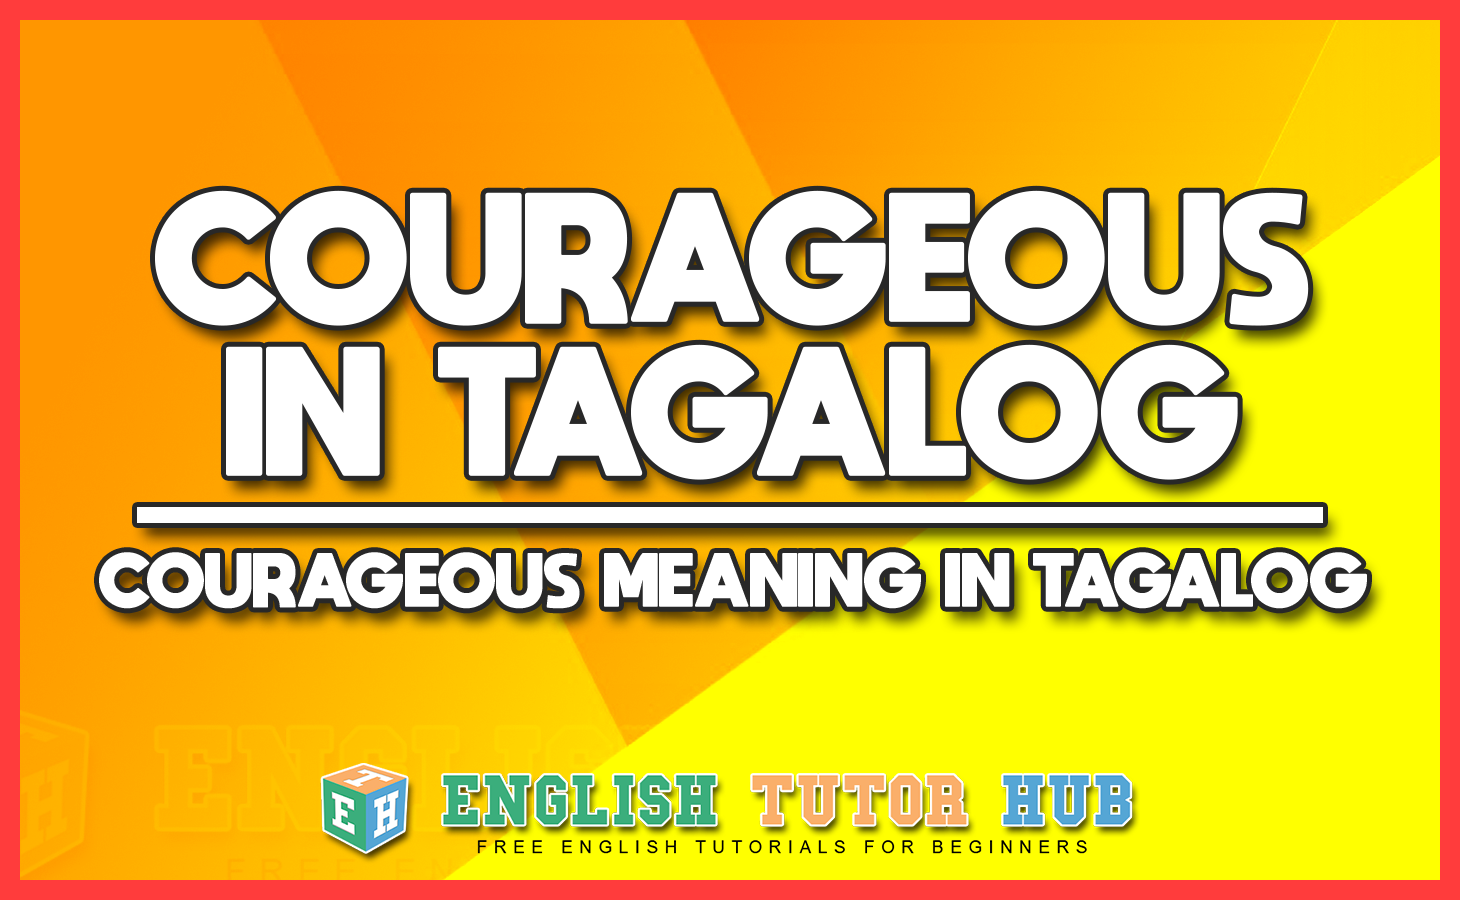 COURAGEOUS IN TAGALOG - COURAGEOUS MEANING IN TAGALOG